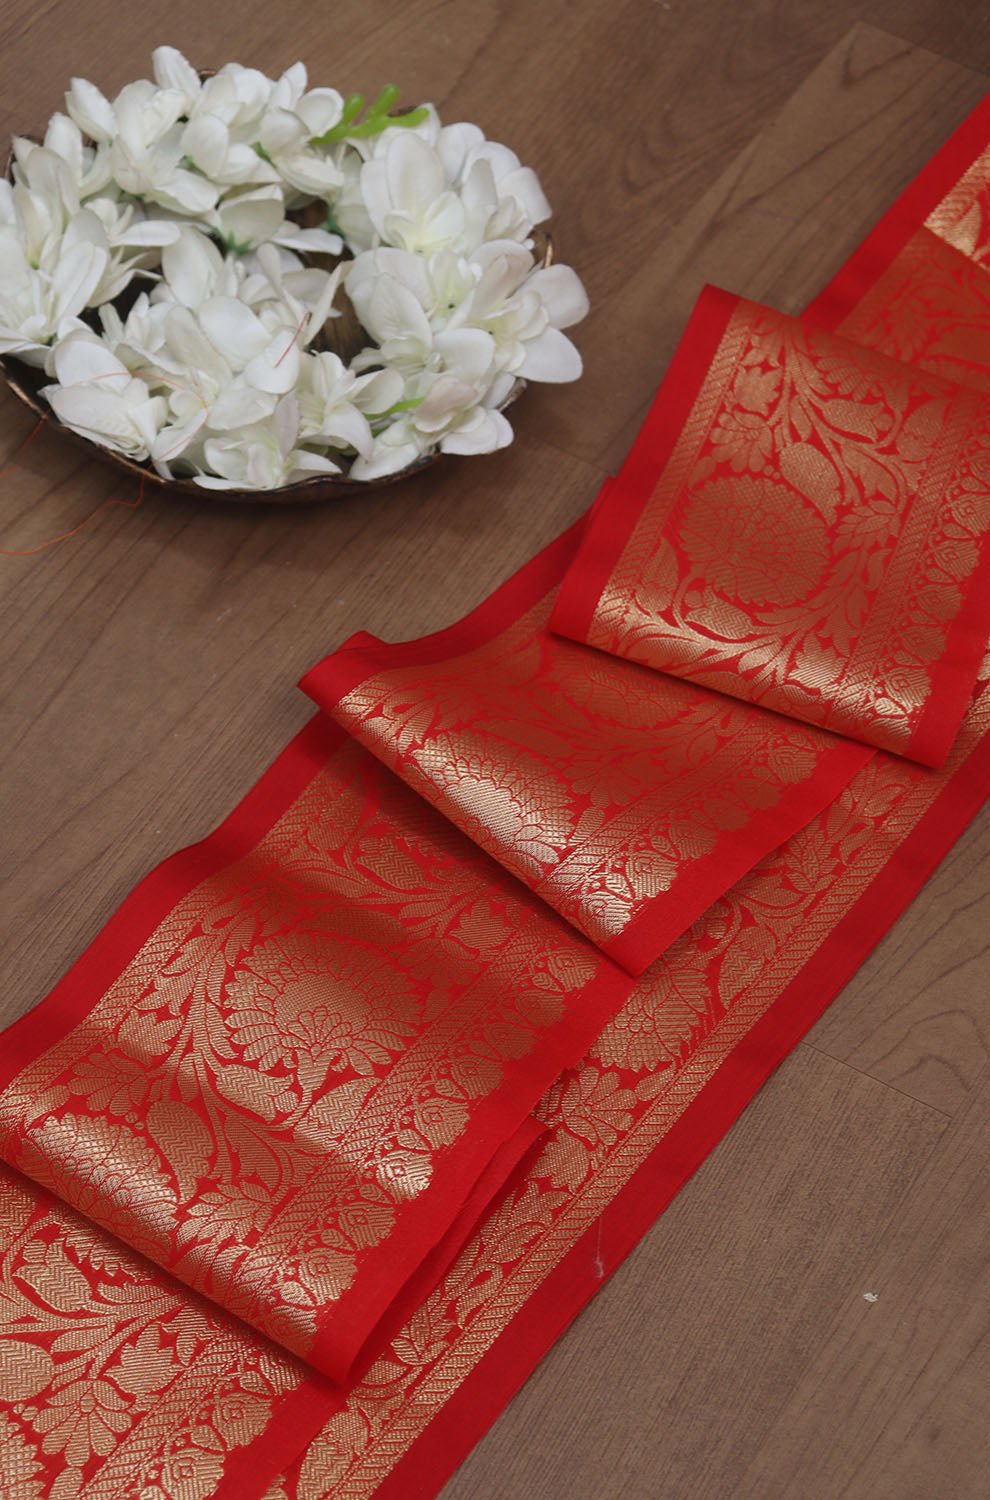 Shop the Exquisite Red Banarasi Silk Lace (1 Mtr) for Elegant